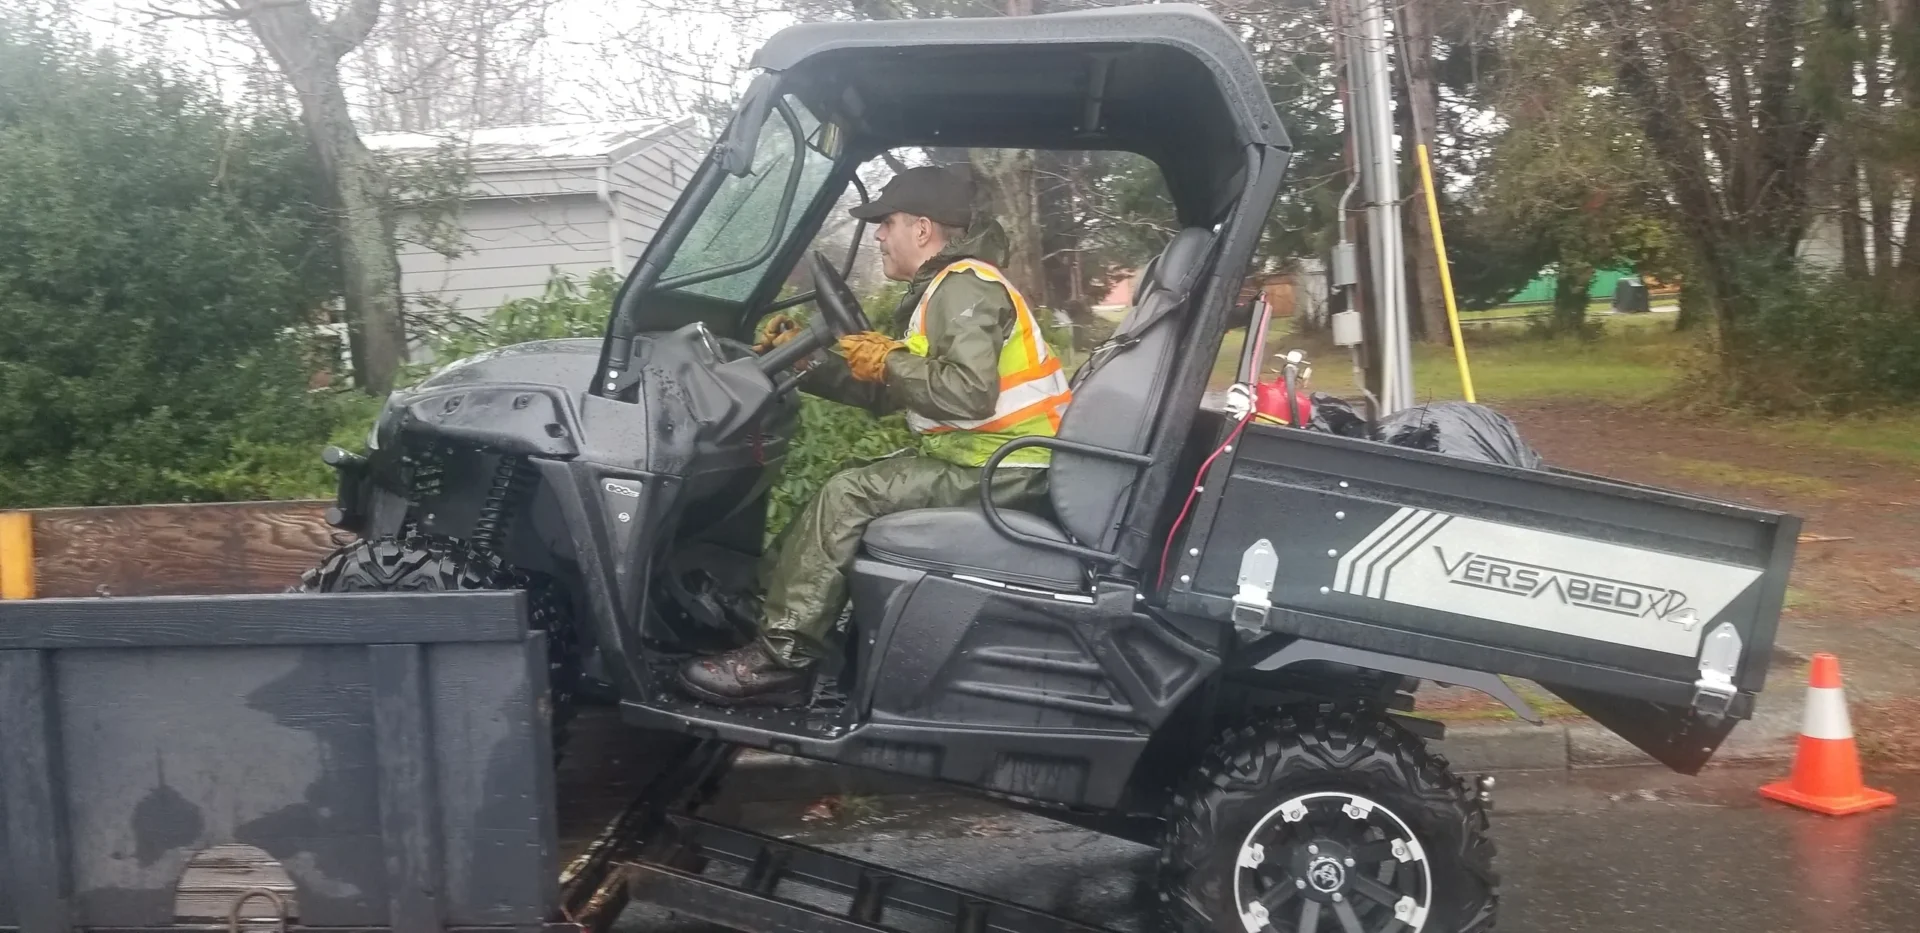 A man in green jacket sitting on the back of a black utility vehicle.